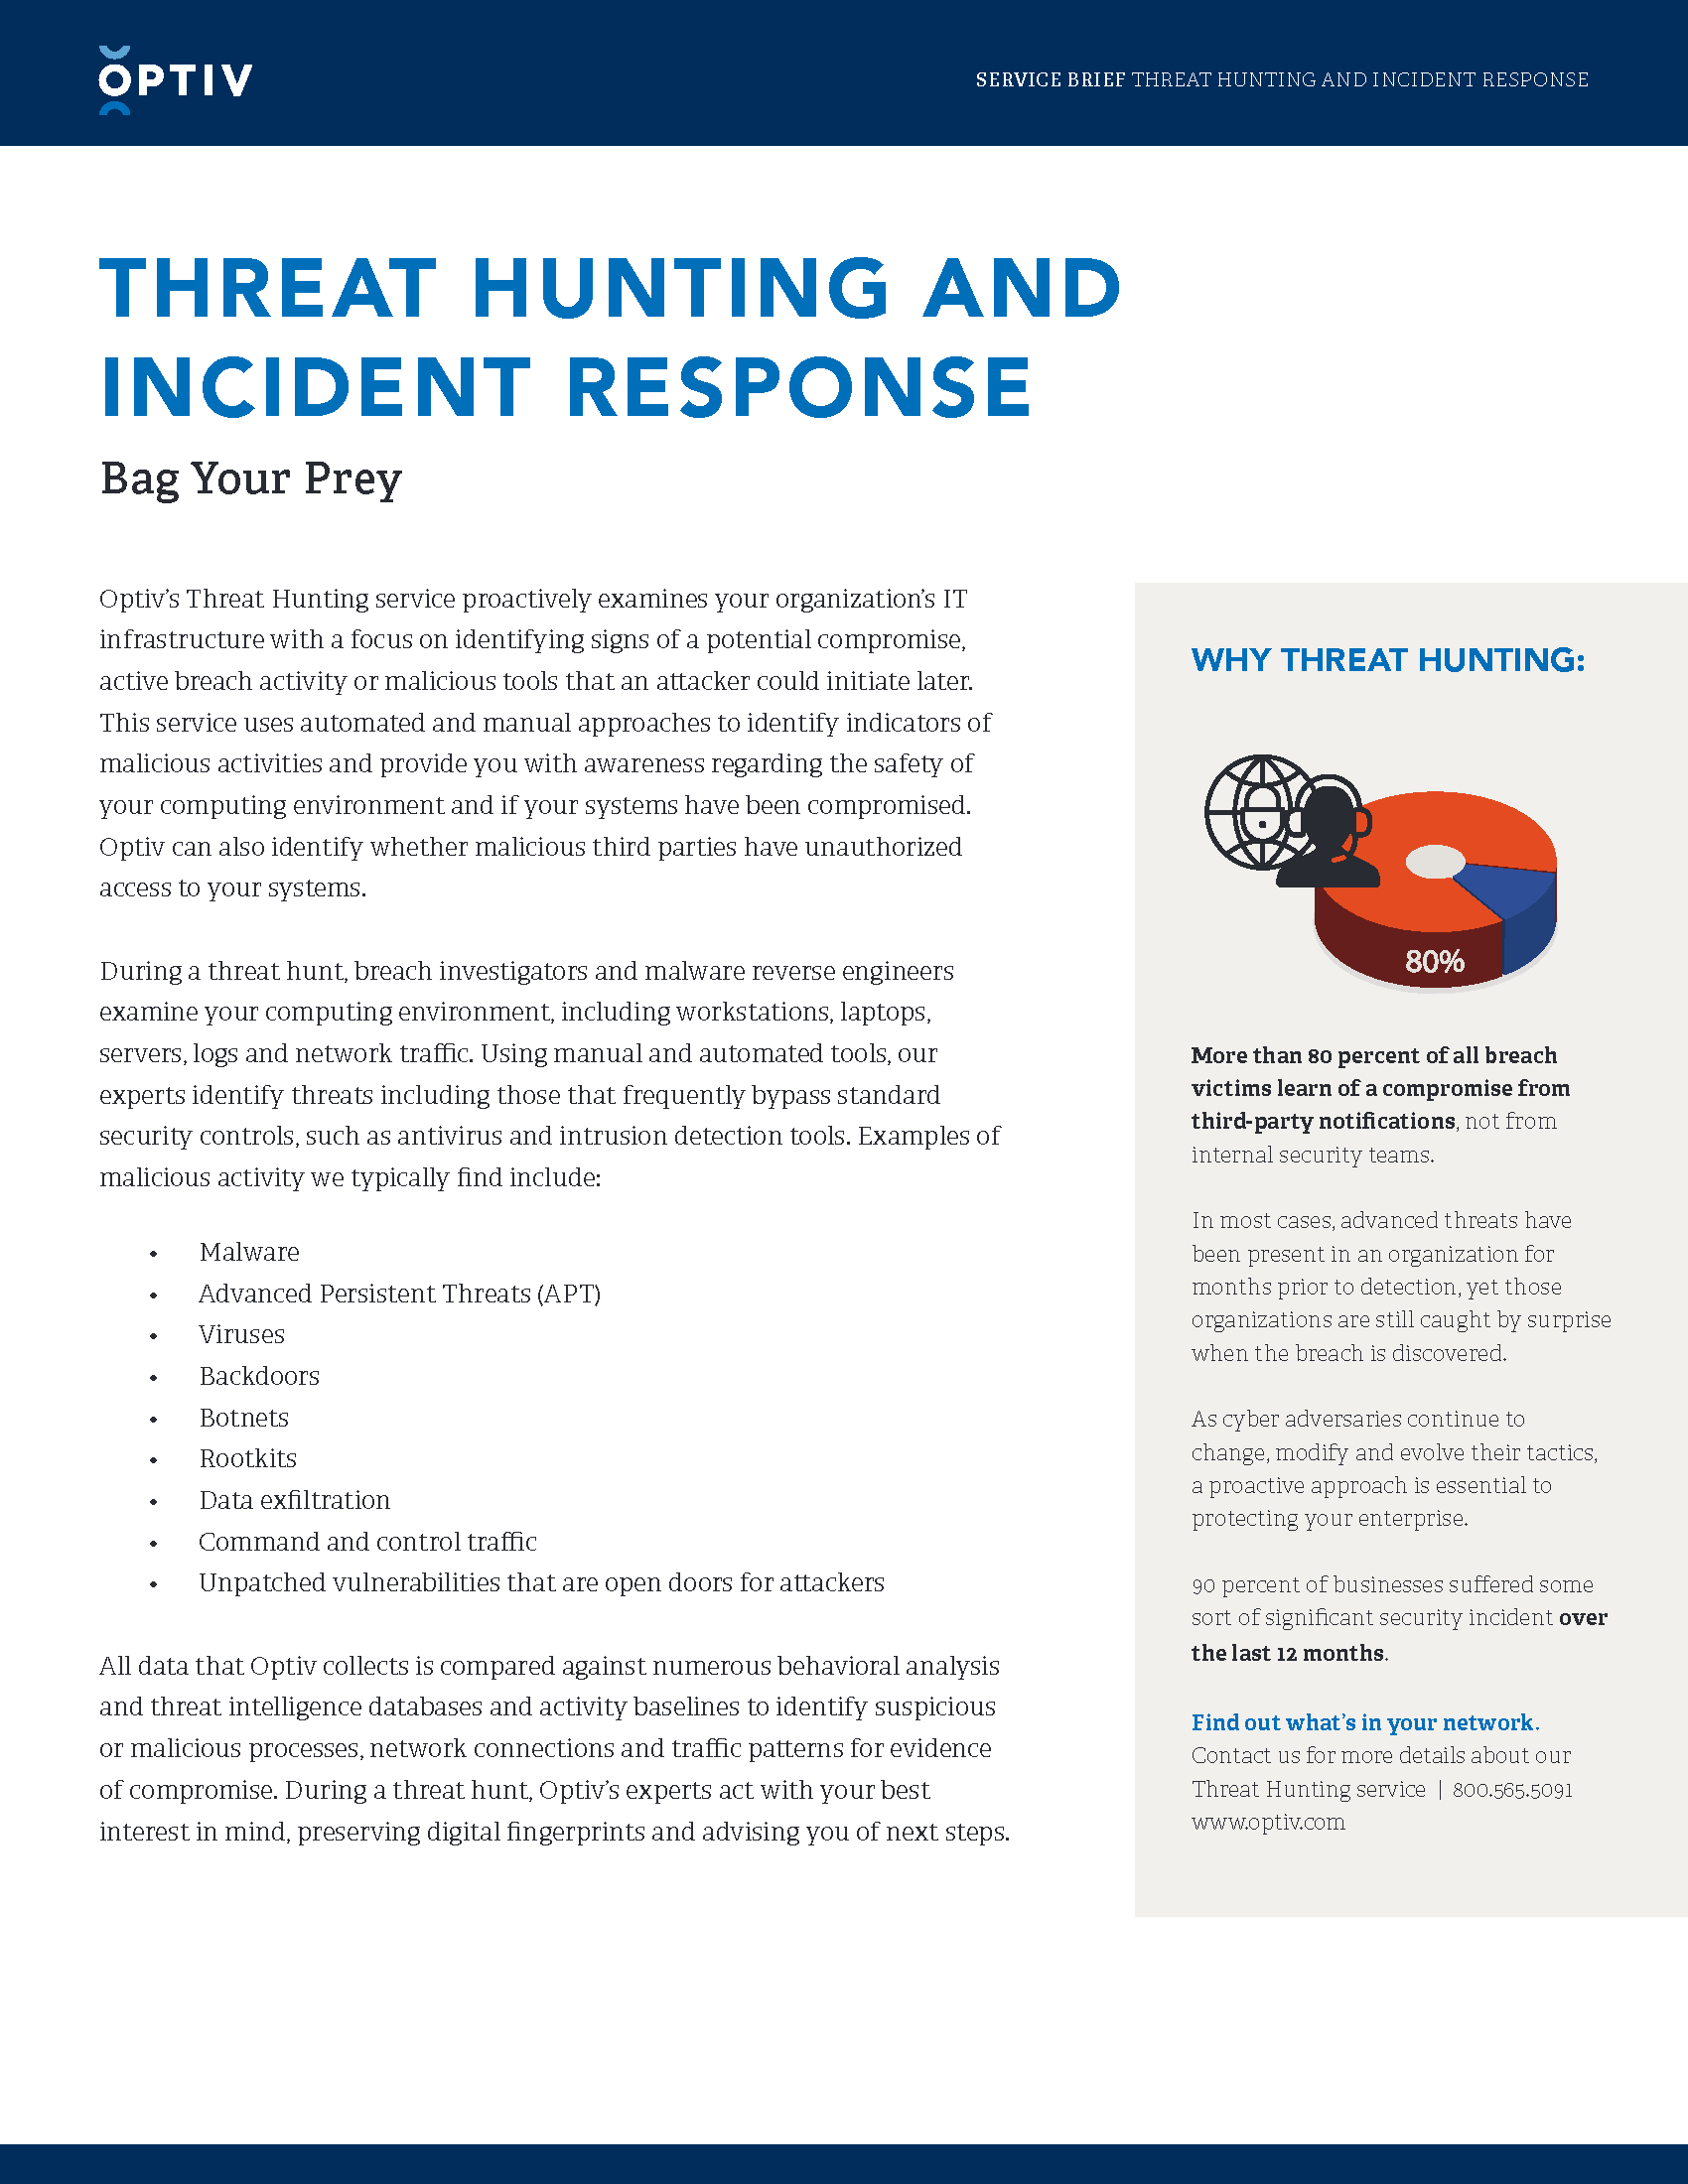 Threat Hunting and Incident Response